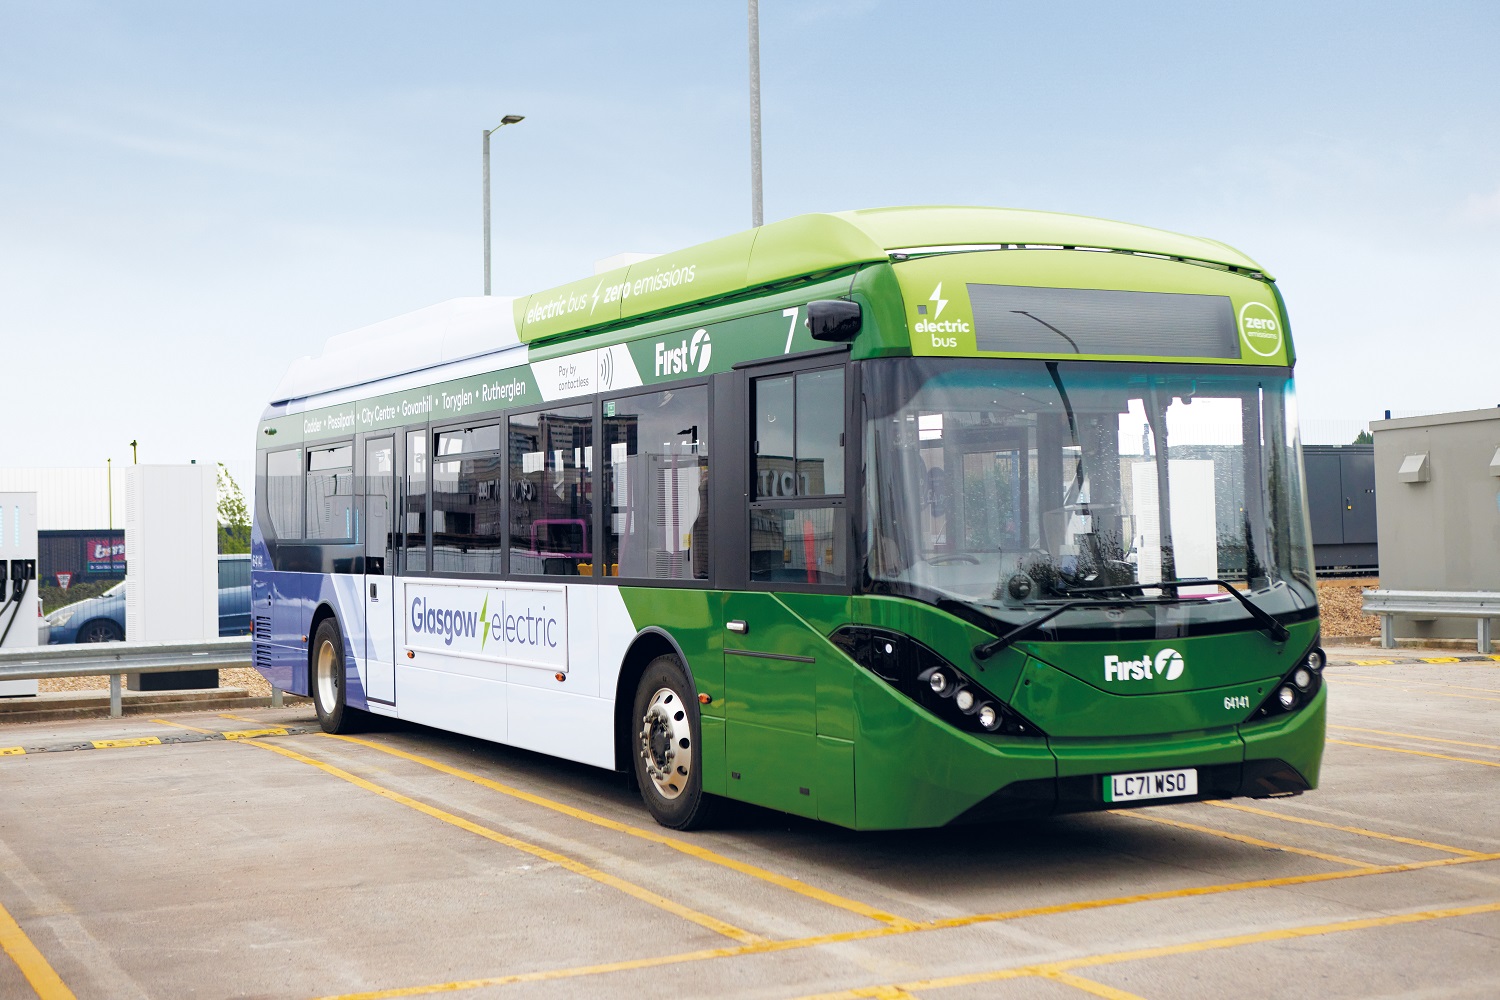 First invests £35m in electric buses in Scotland